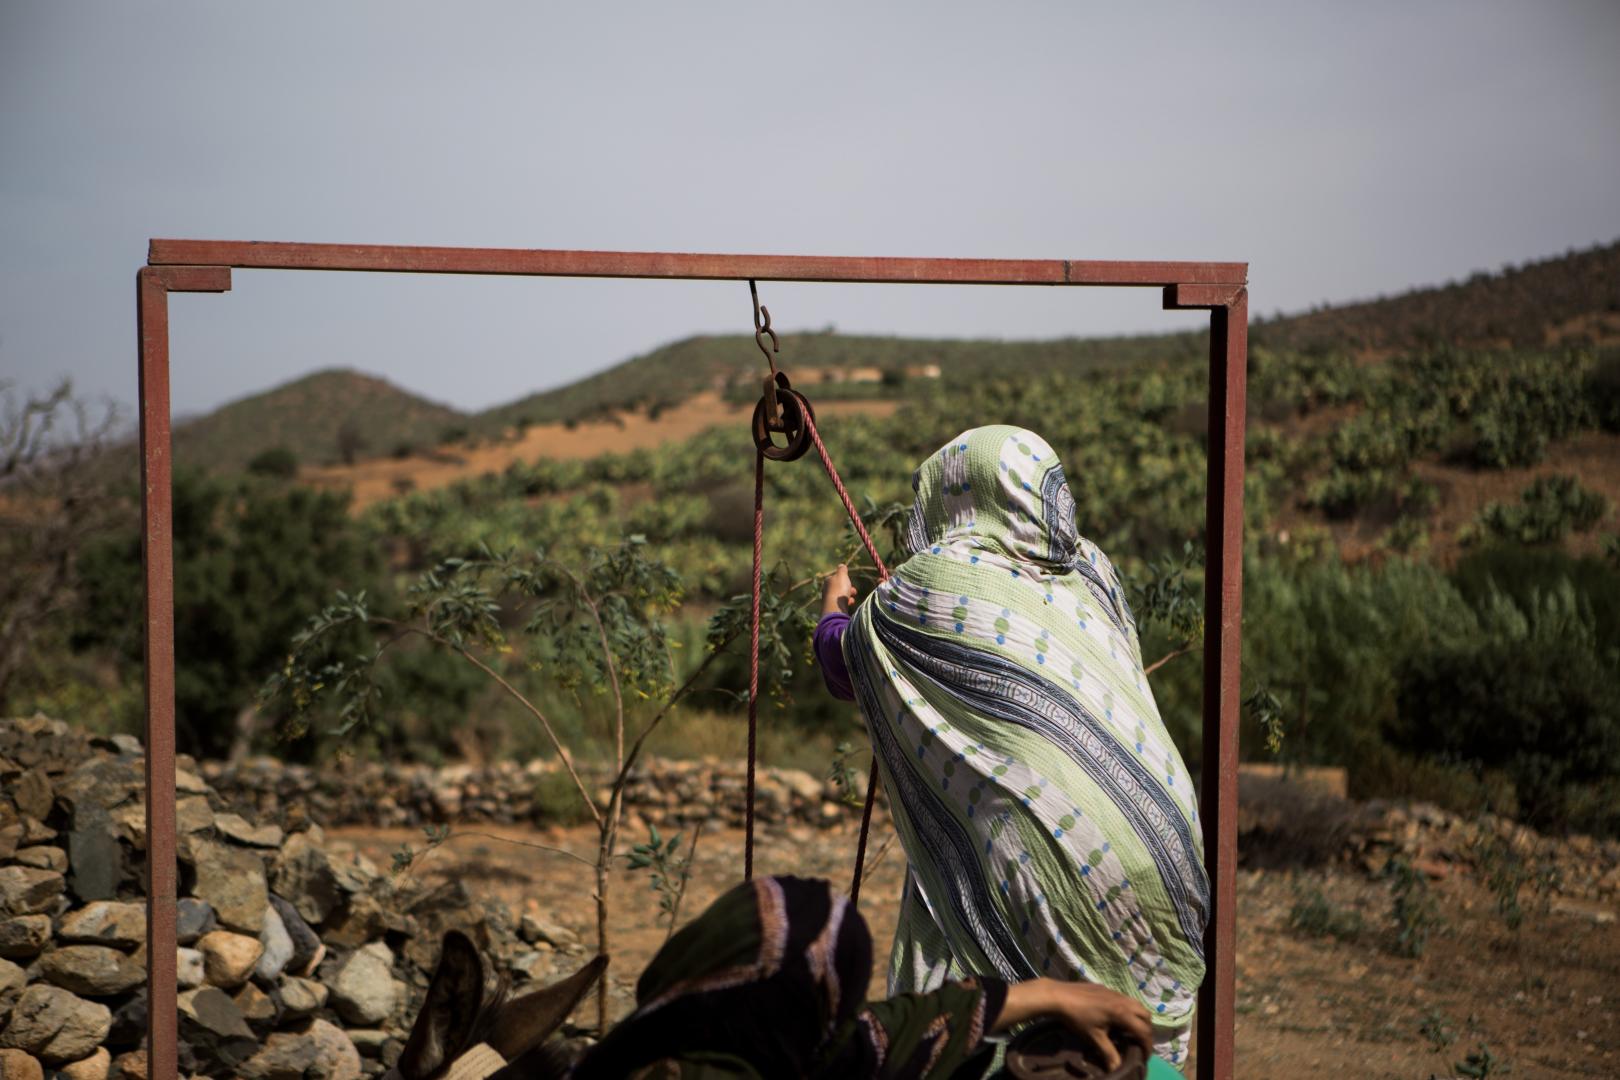 WOMEN-LED FOG HARVESTING FOR A RESILIENT, SUSTAINABLE ECOSYSTEM | MOROCCO